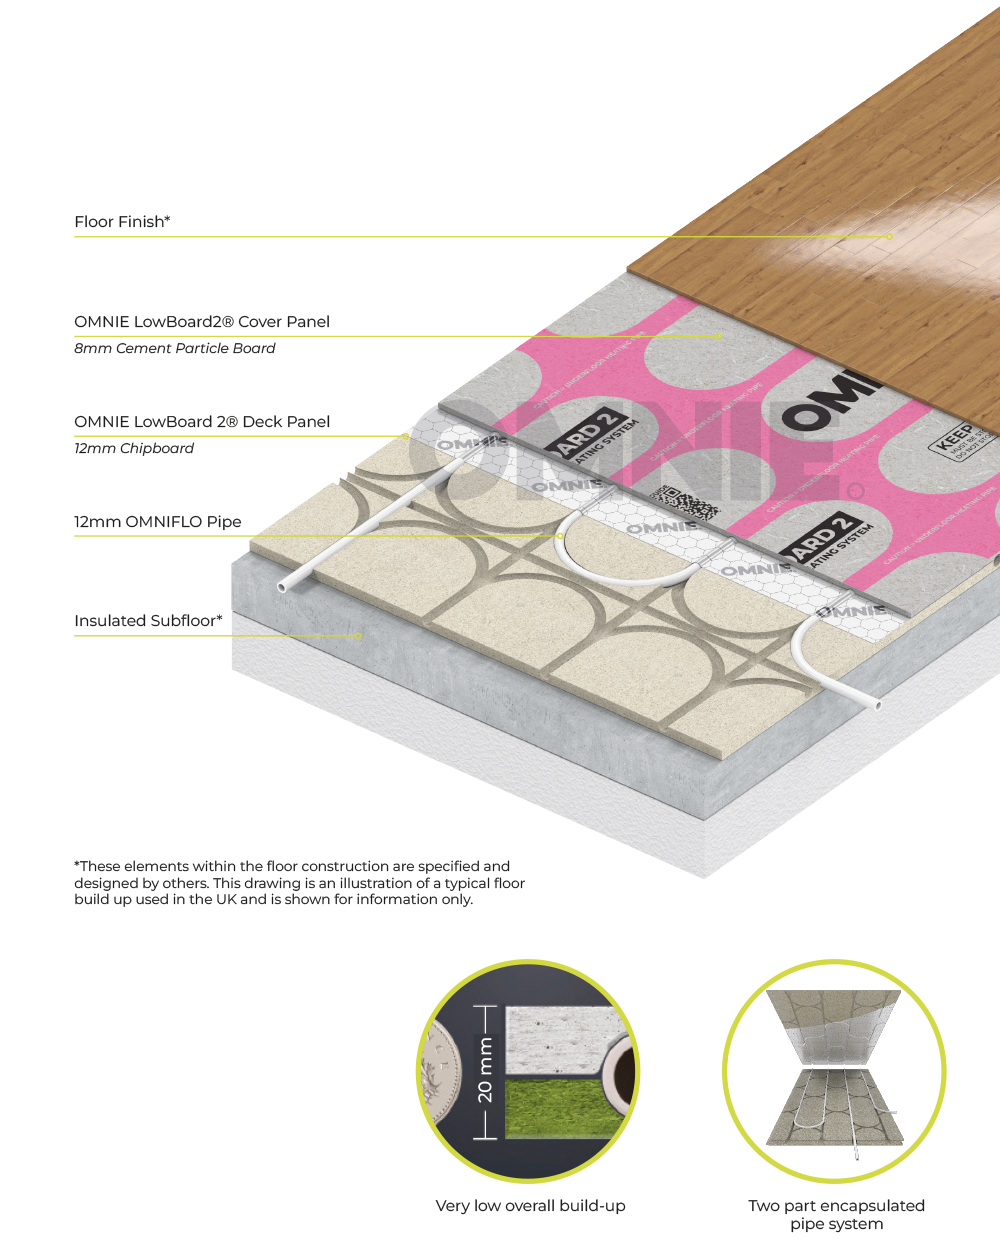 LowBoard 2® Plus – for Low Build Up floors